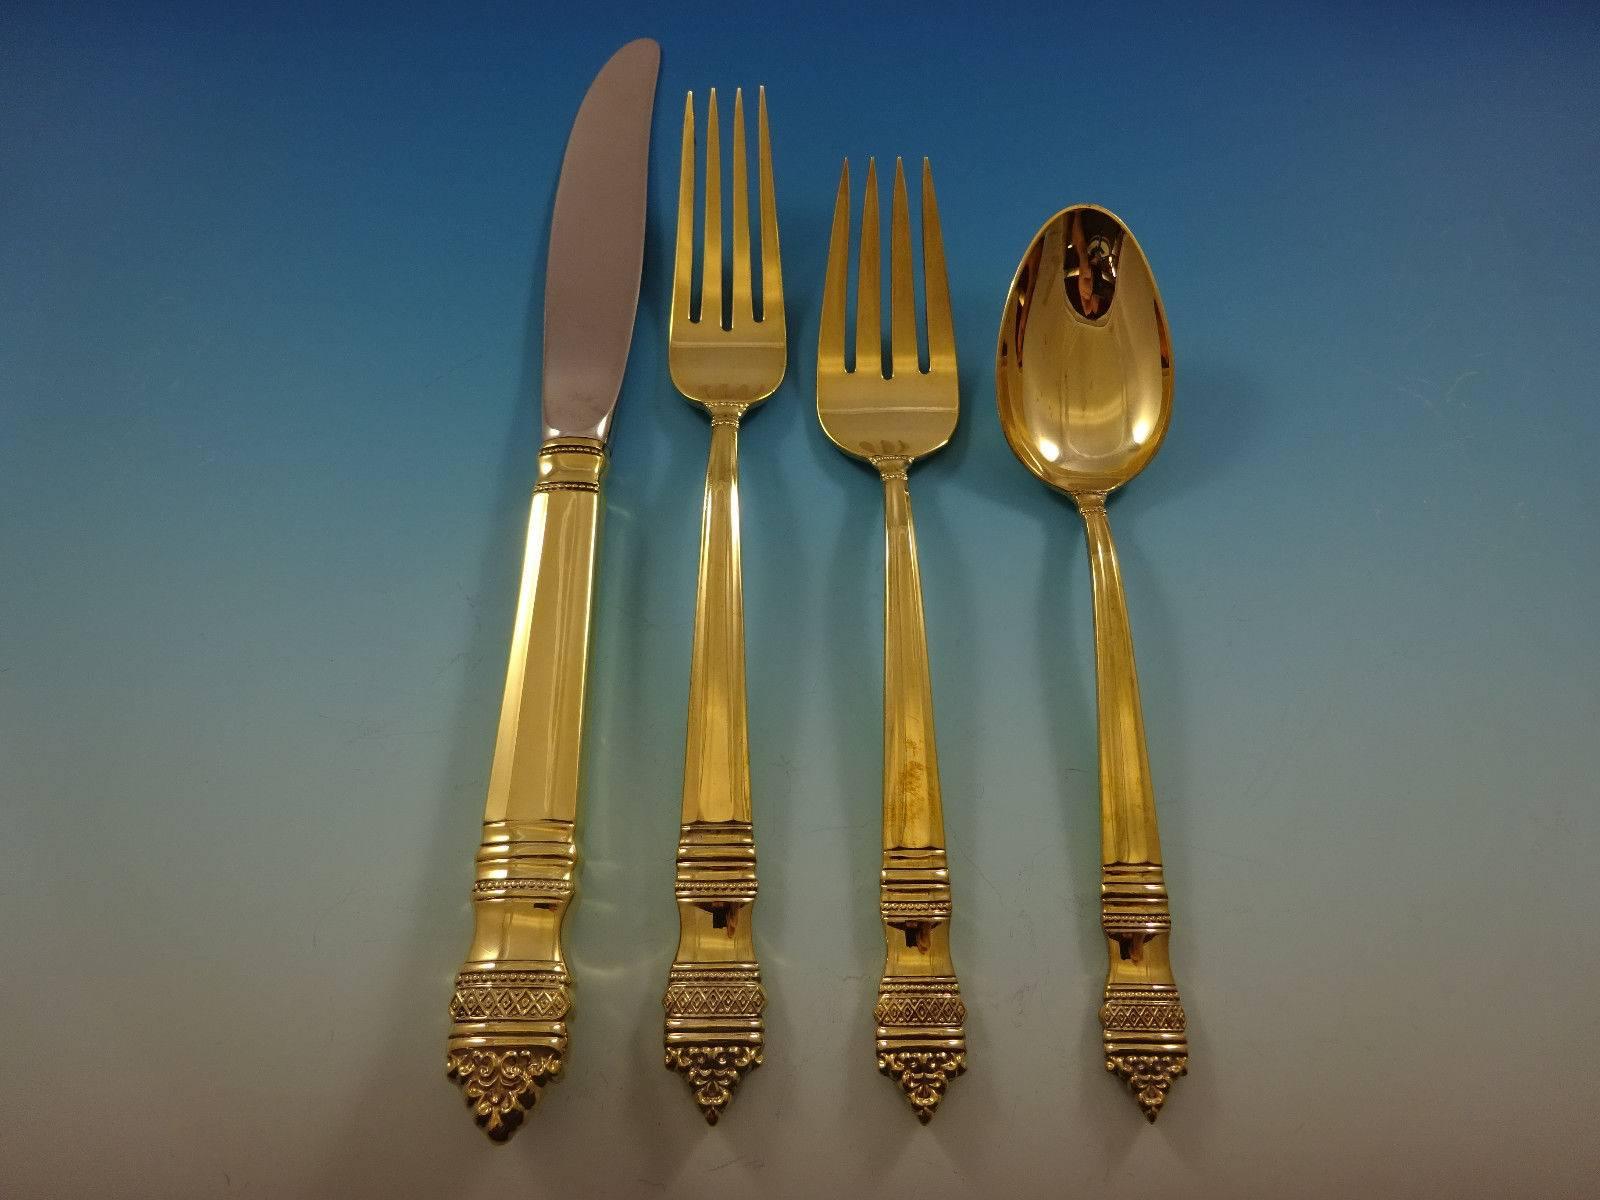 Danish baroque gold by Towle sterling silver flatware set - 48 pieces. Make a bold statement on your table with gold! This set is vermeil (completely gold-washed over sterling silver) and includes:

12 knives, 9